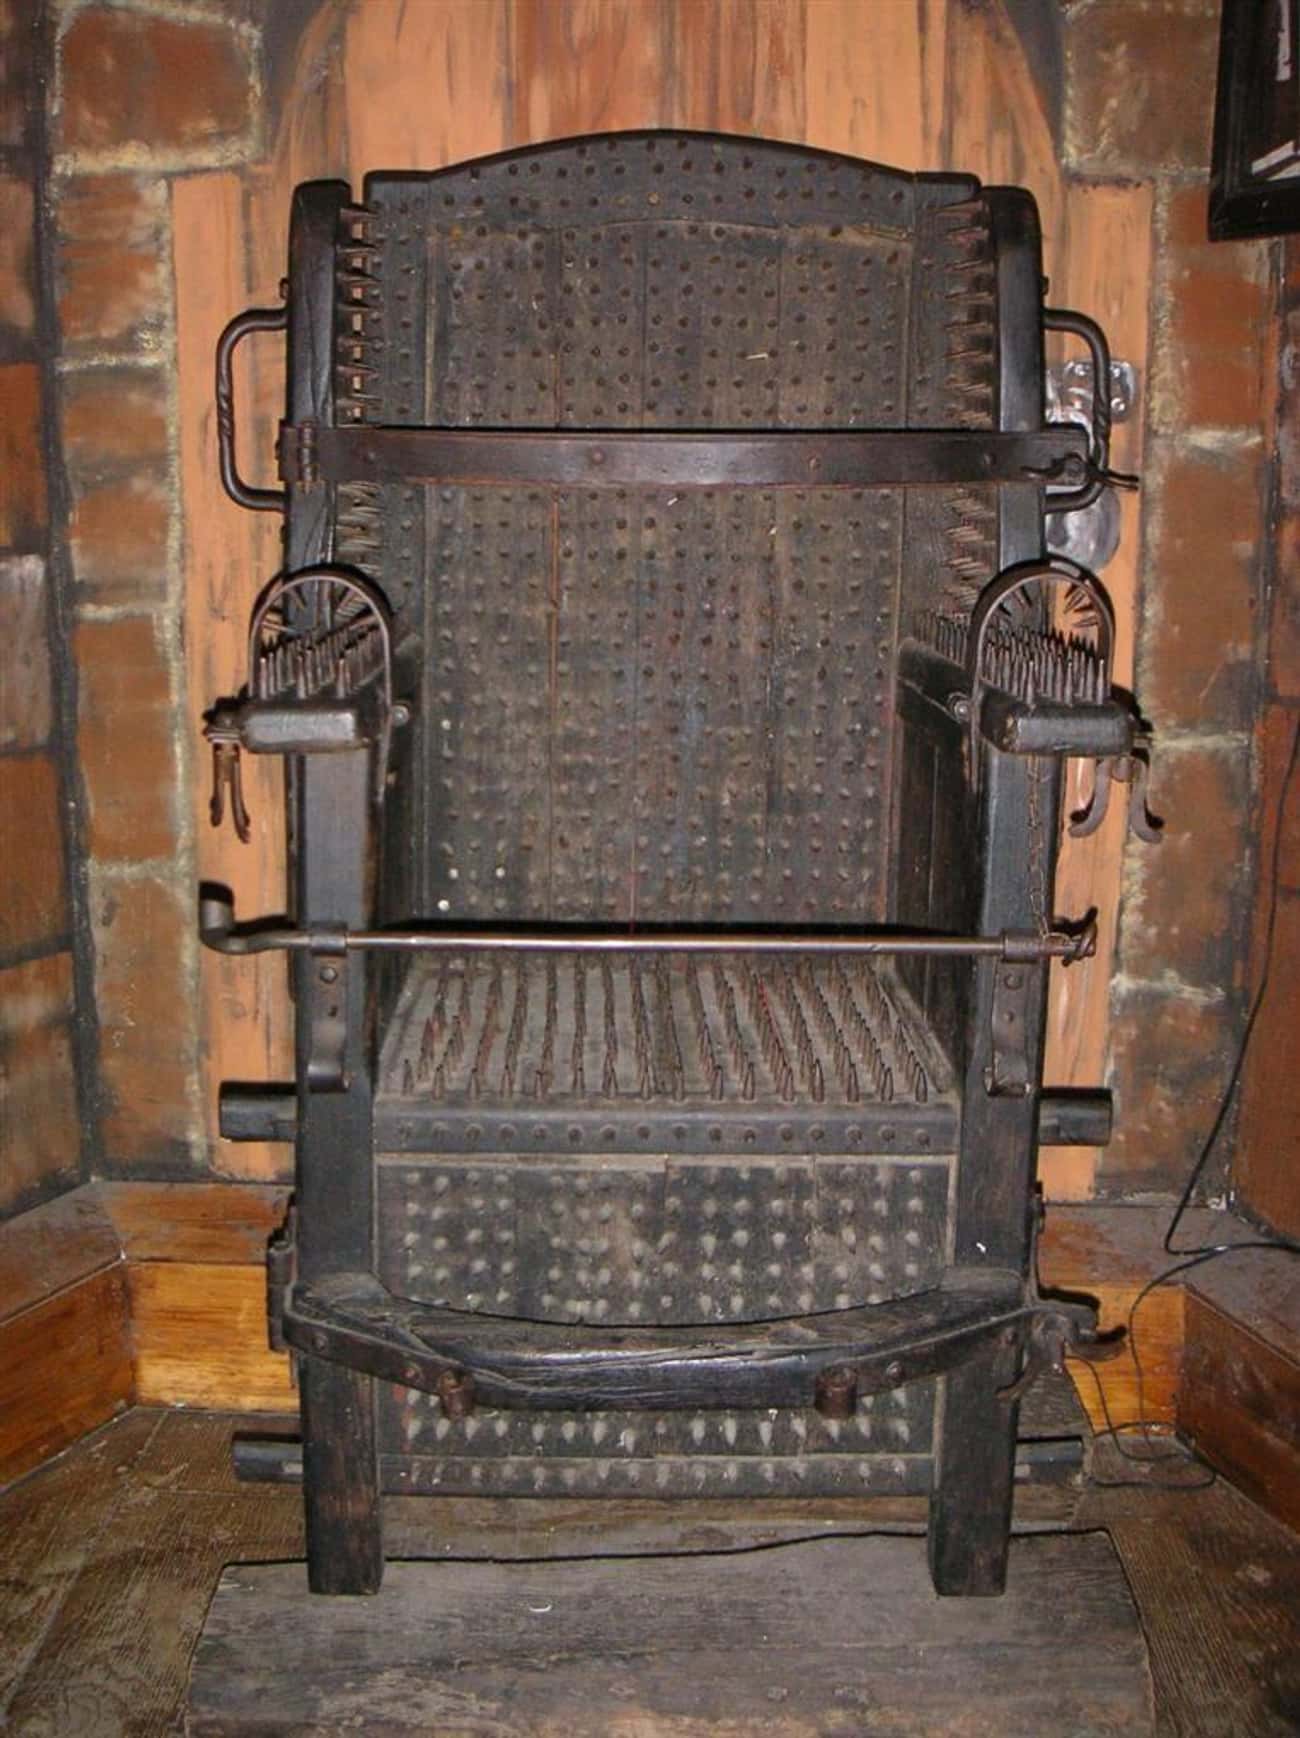 The Iron Chair